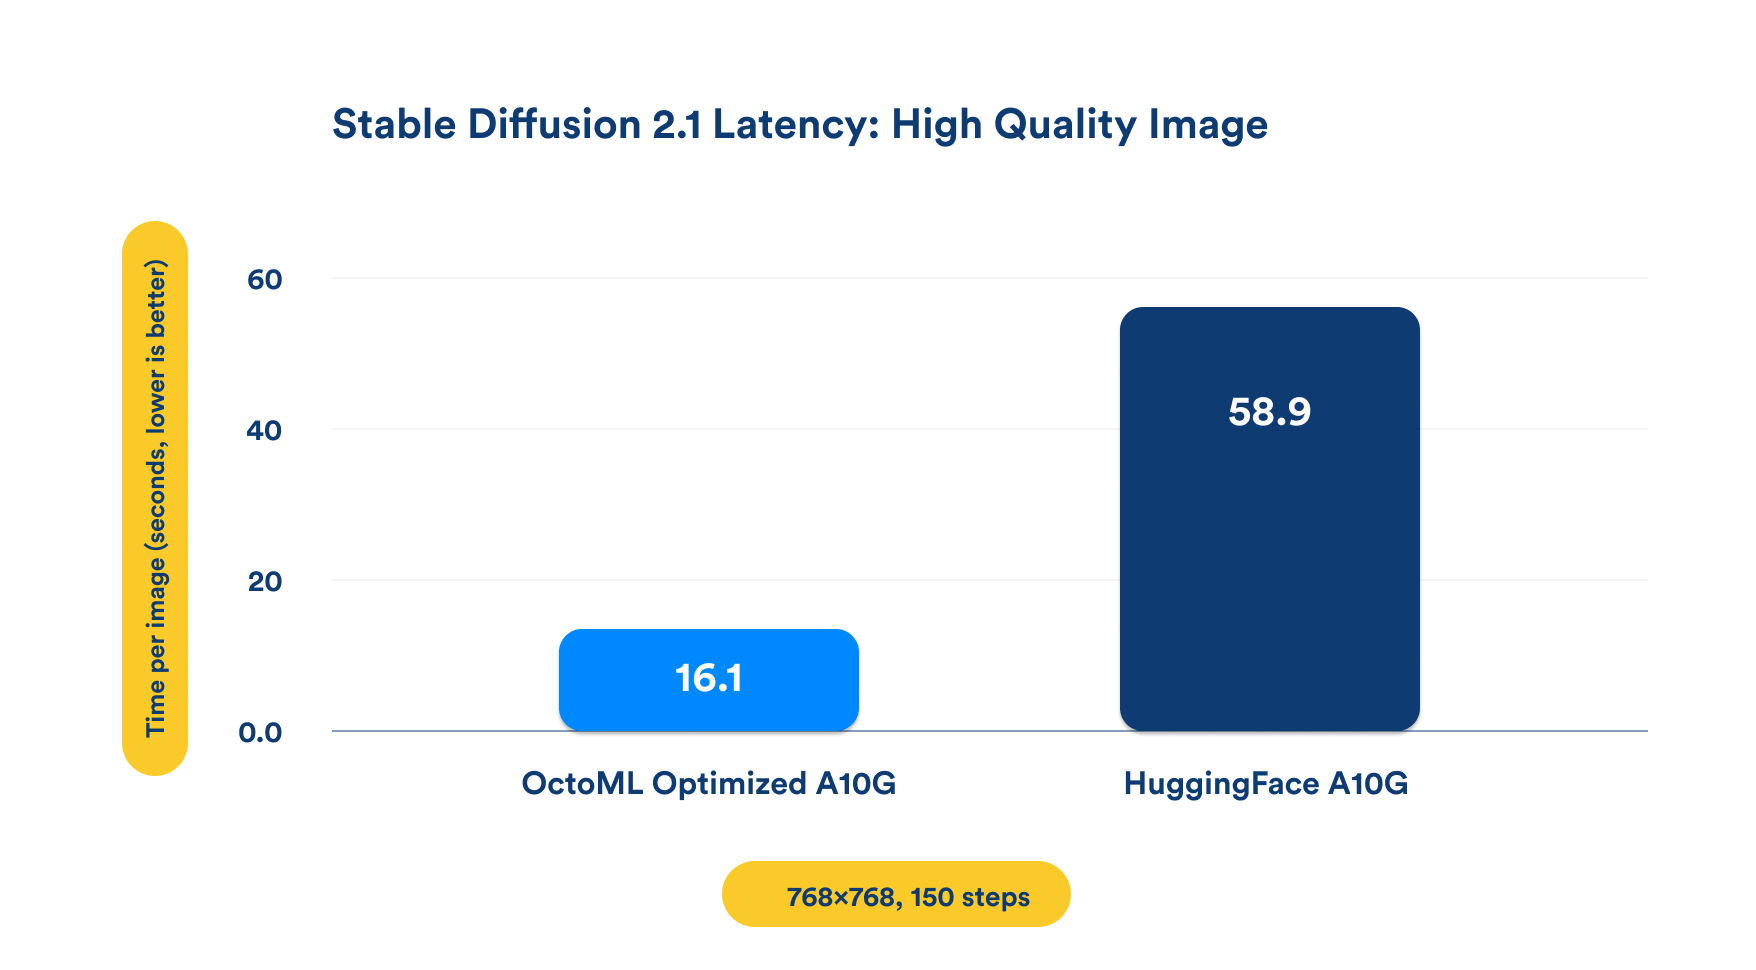 Chart showing Stable Diffusion 2.1 latency times for high quality images on OctoML vs HuggingFace || '